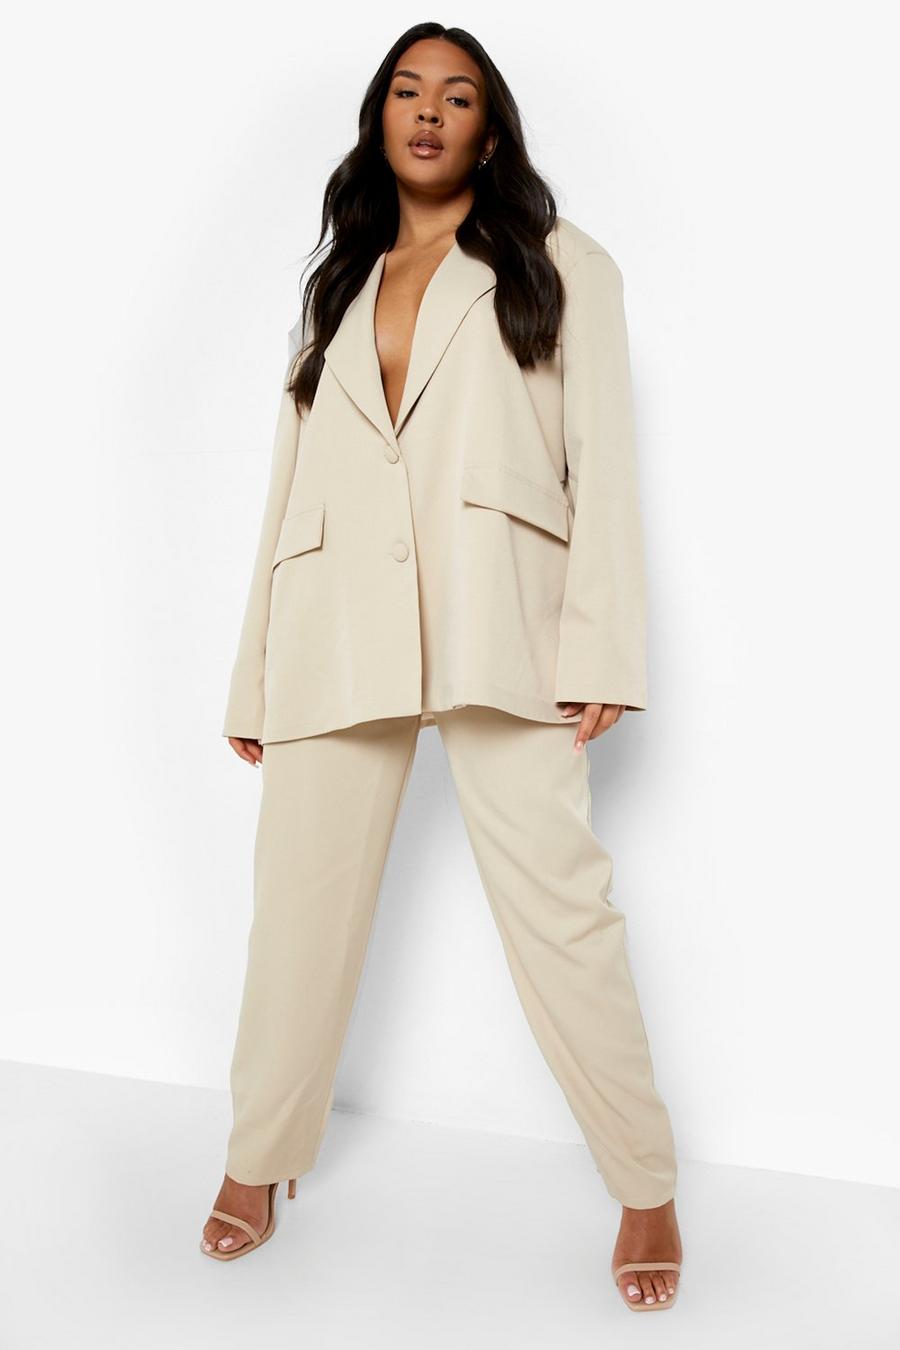 Stone beige Plus Super Skinny Double Breasted Blazer & Pants Suits